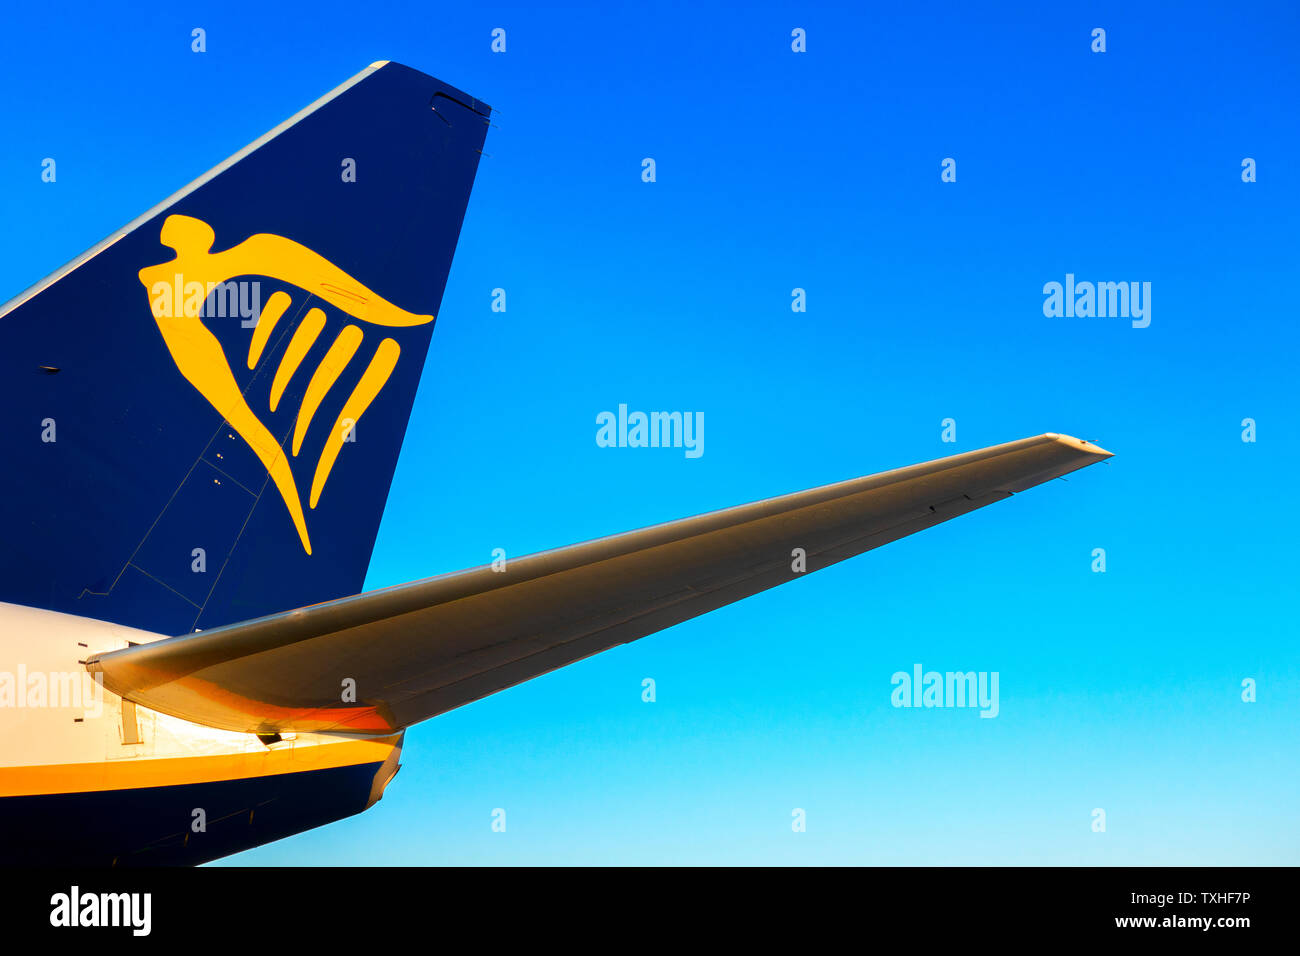 Alicante, Spain - June 18, 2019: Ryanair logo on the tail of aircraft plane Stock Photo